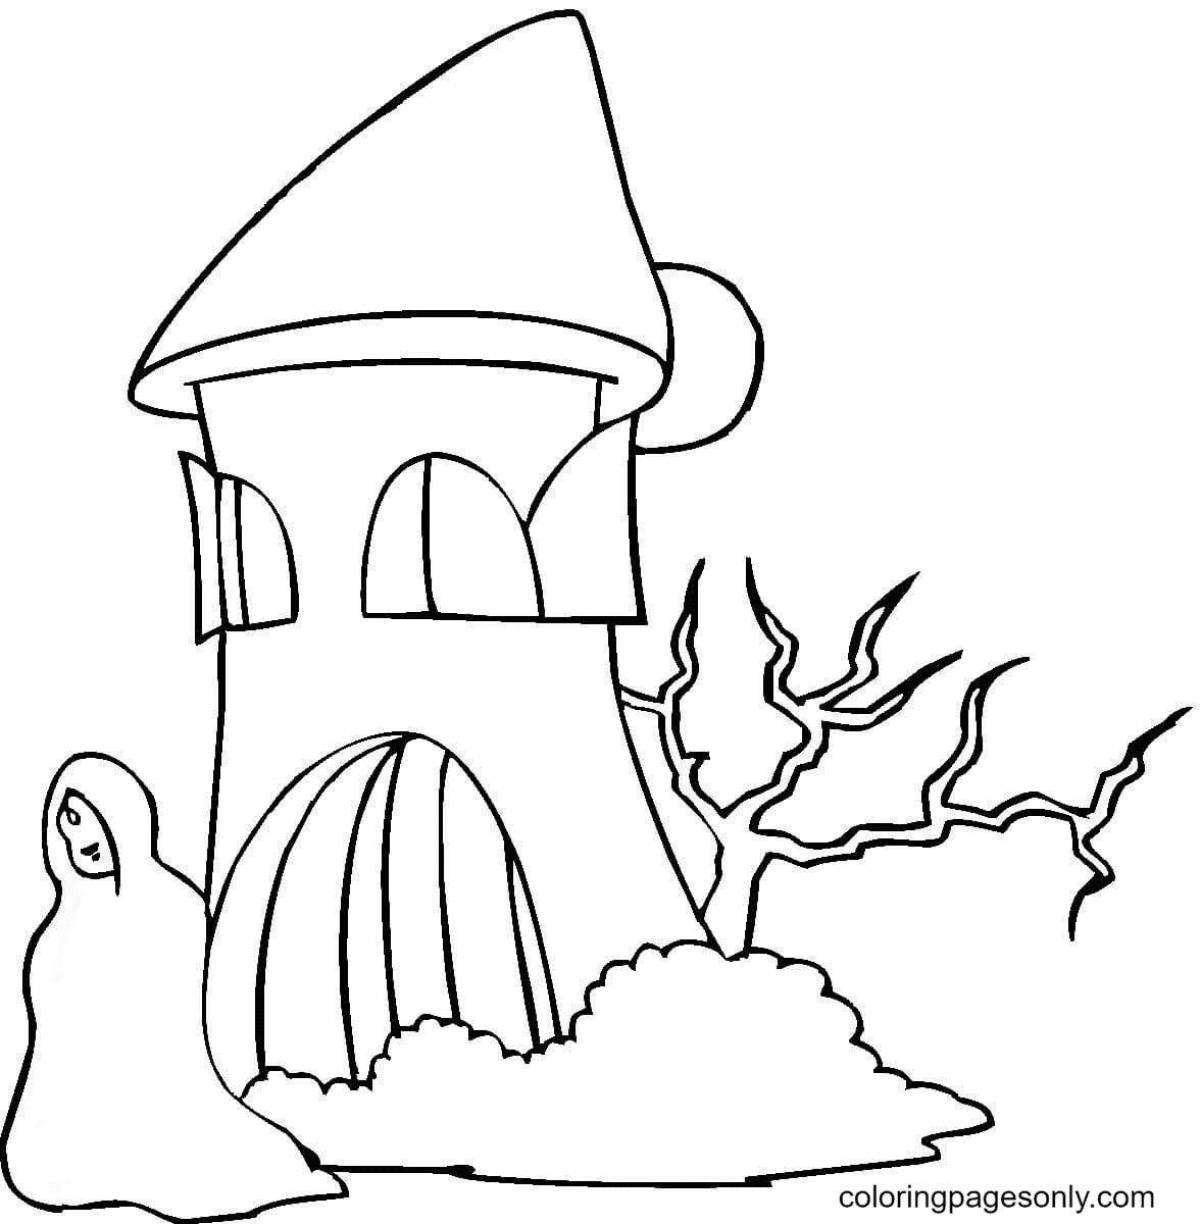 Halloween scary house coloring page